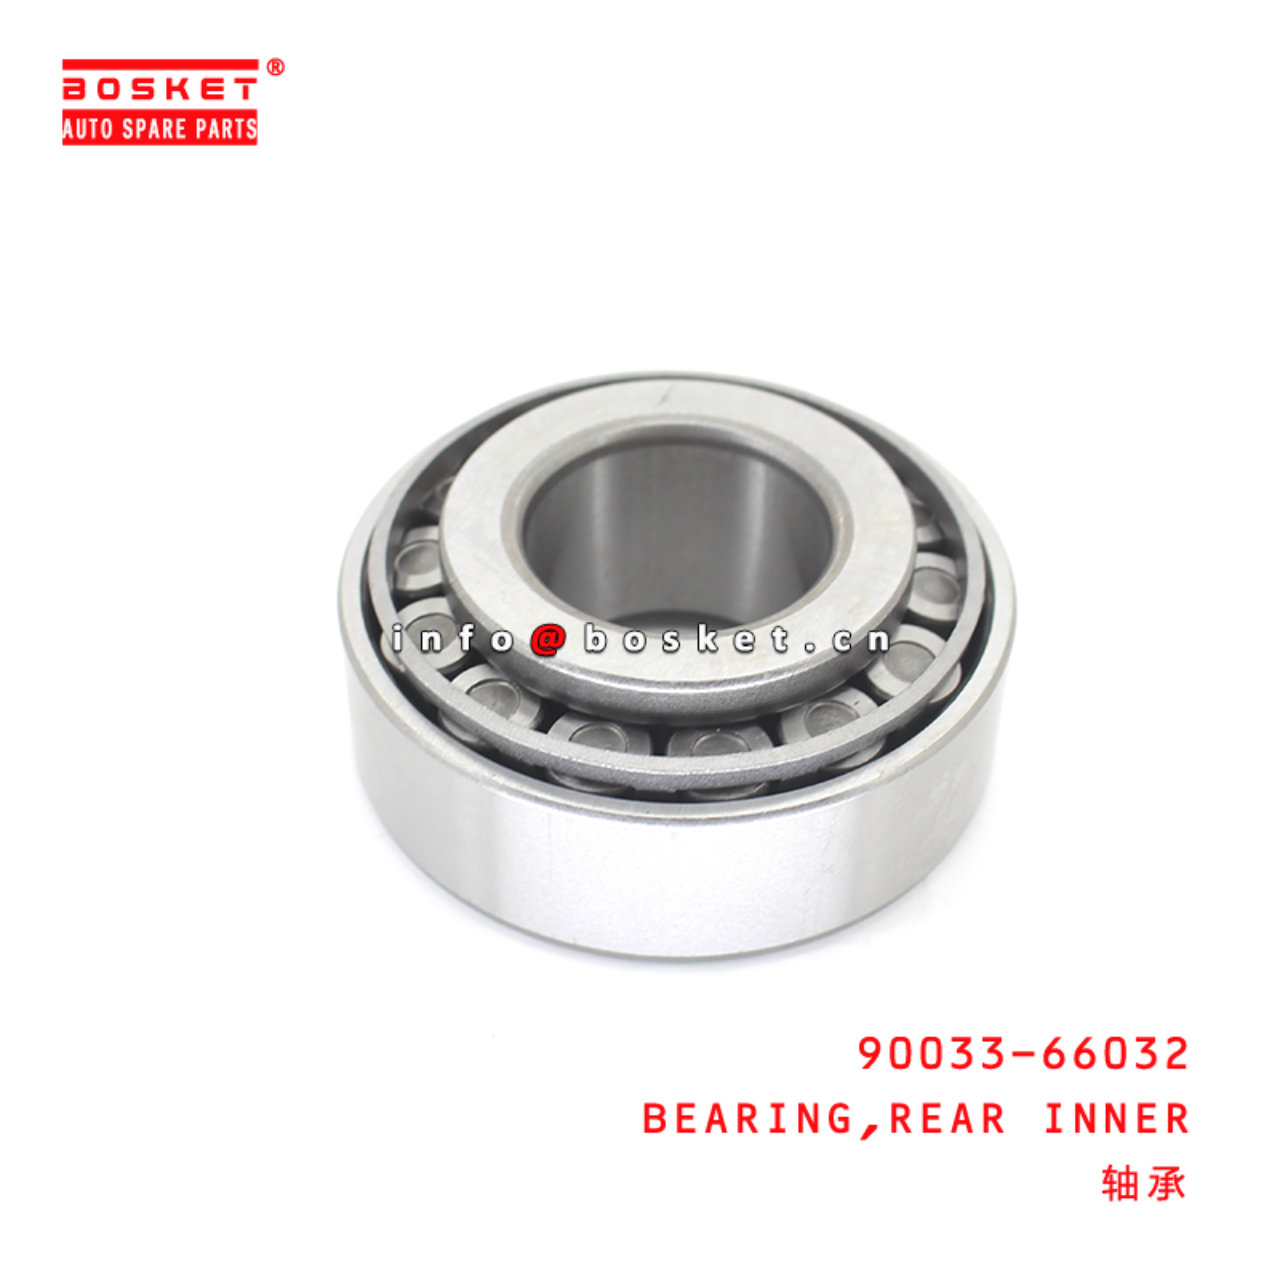 90033-66032 Front Outer Bearing Suitable for ISUZU HINO700